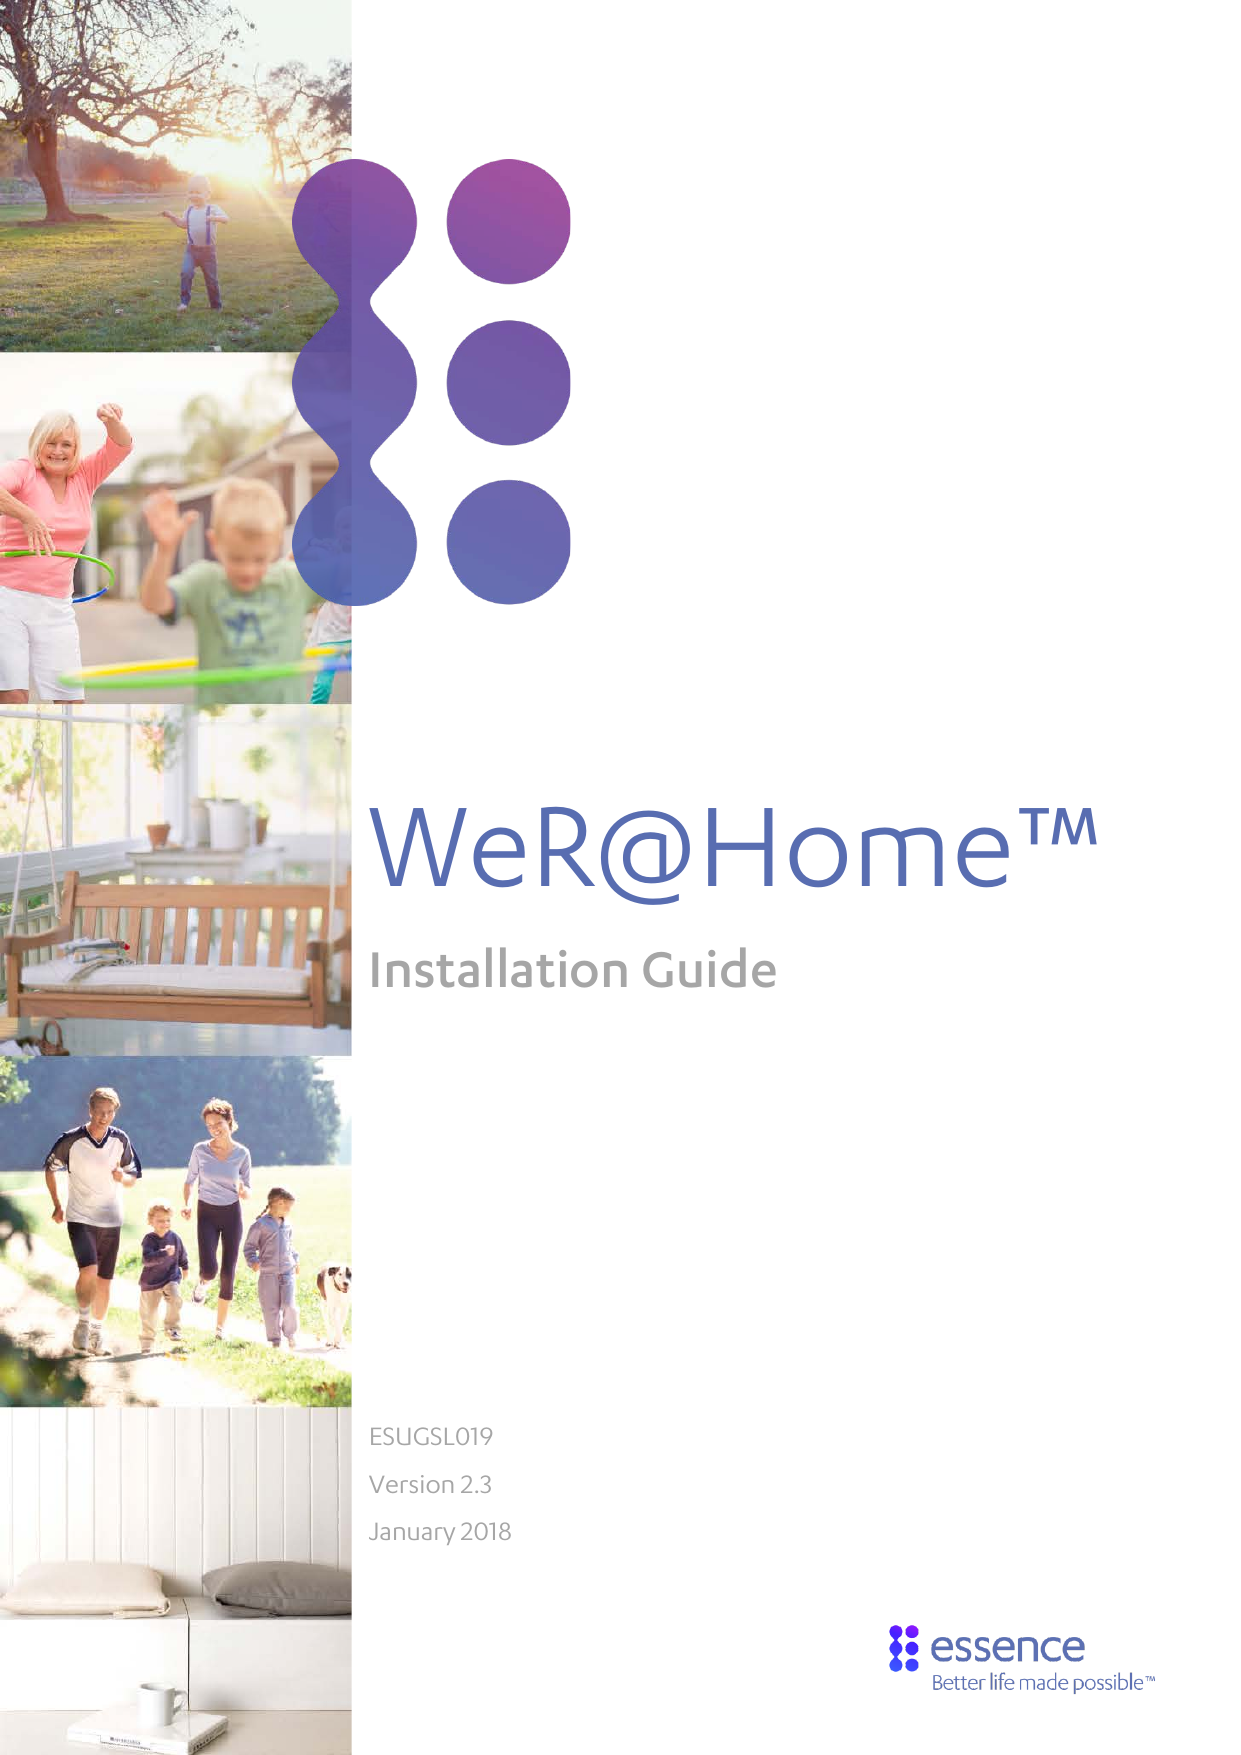            WeR@Home™ Installation Guide         ESUGSL019 Version 2.3 January 2018  